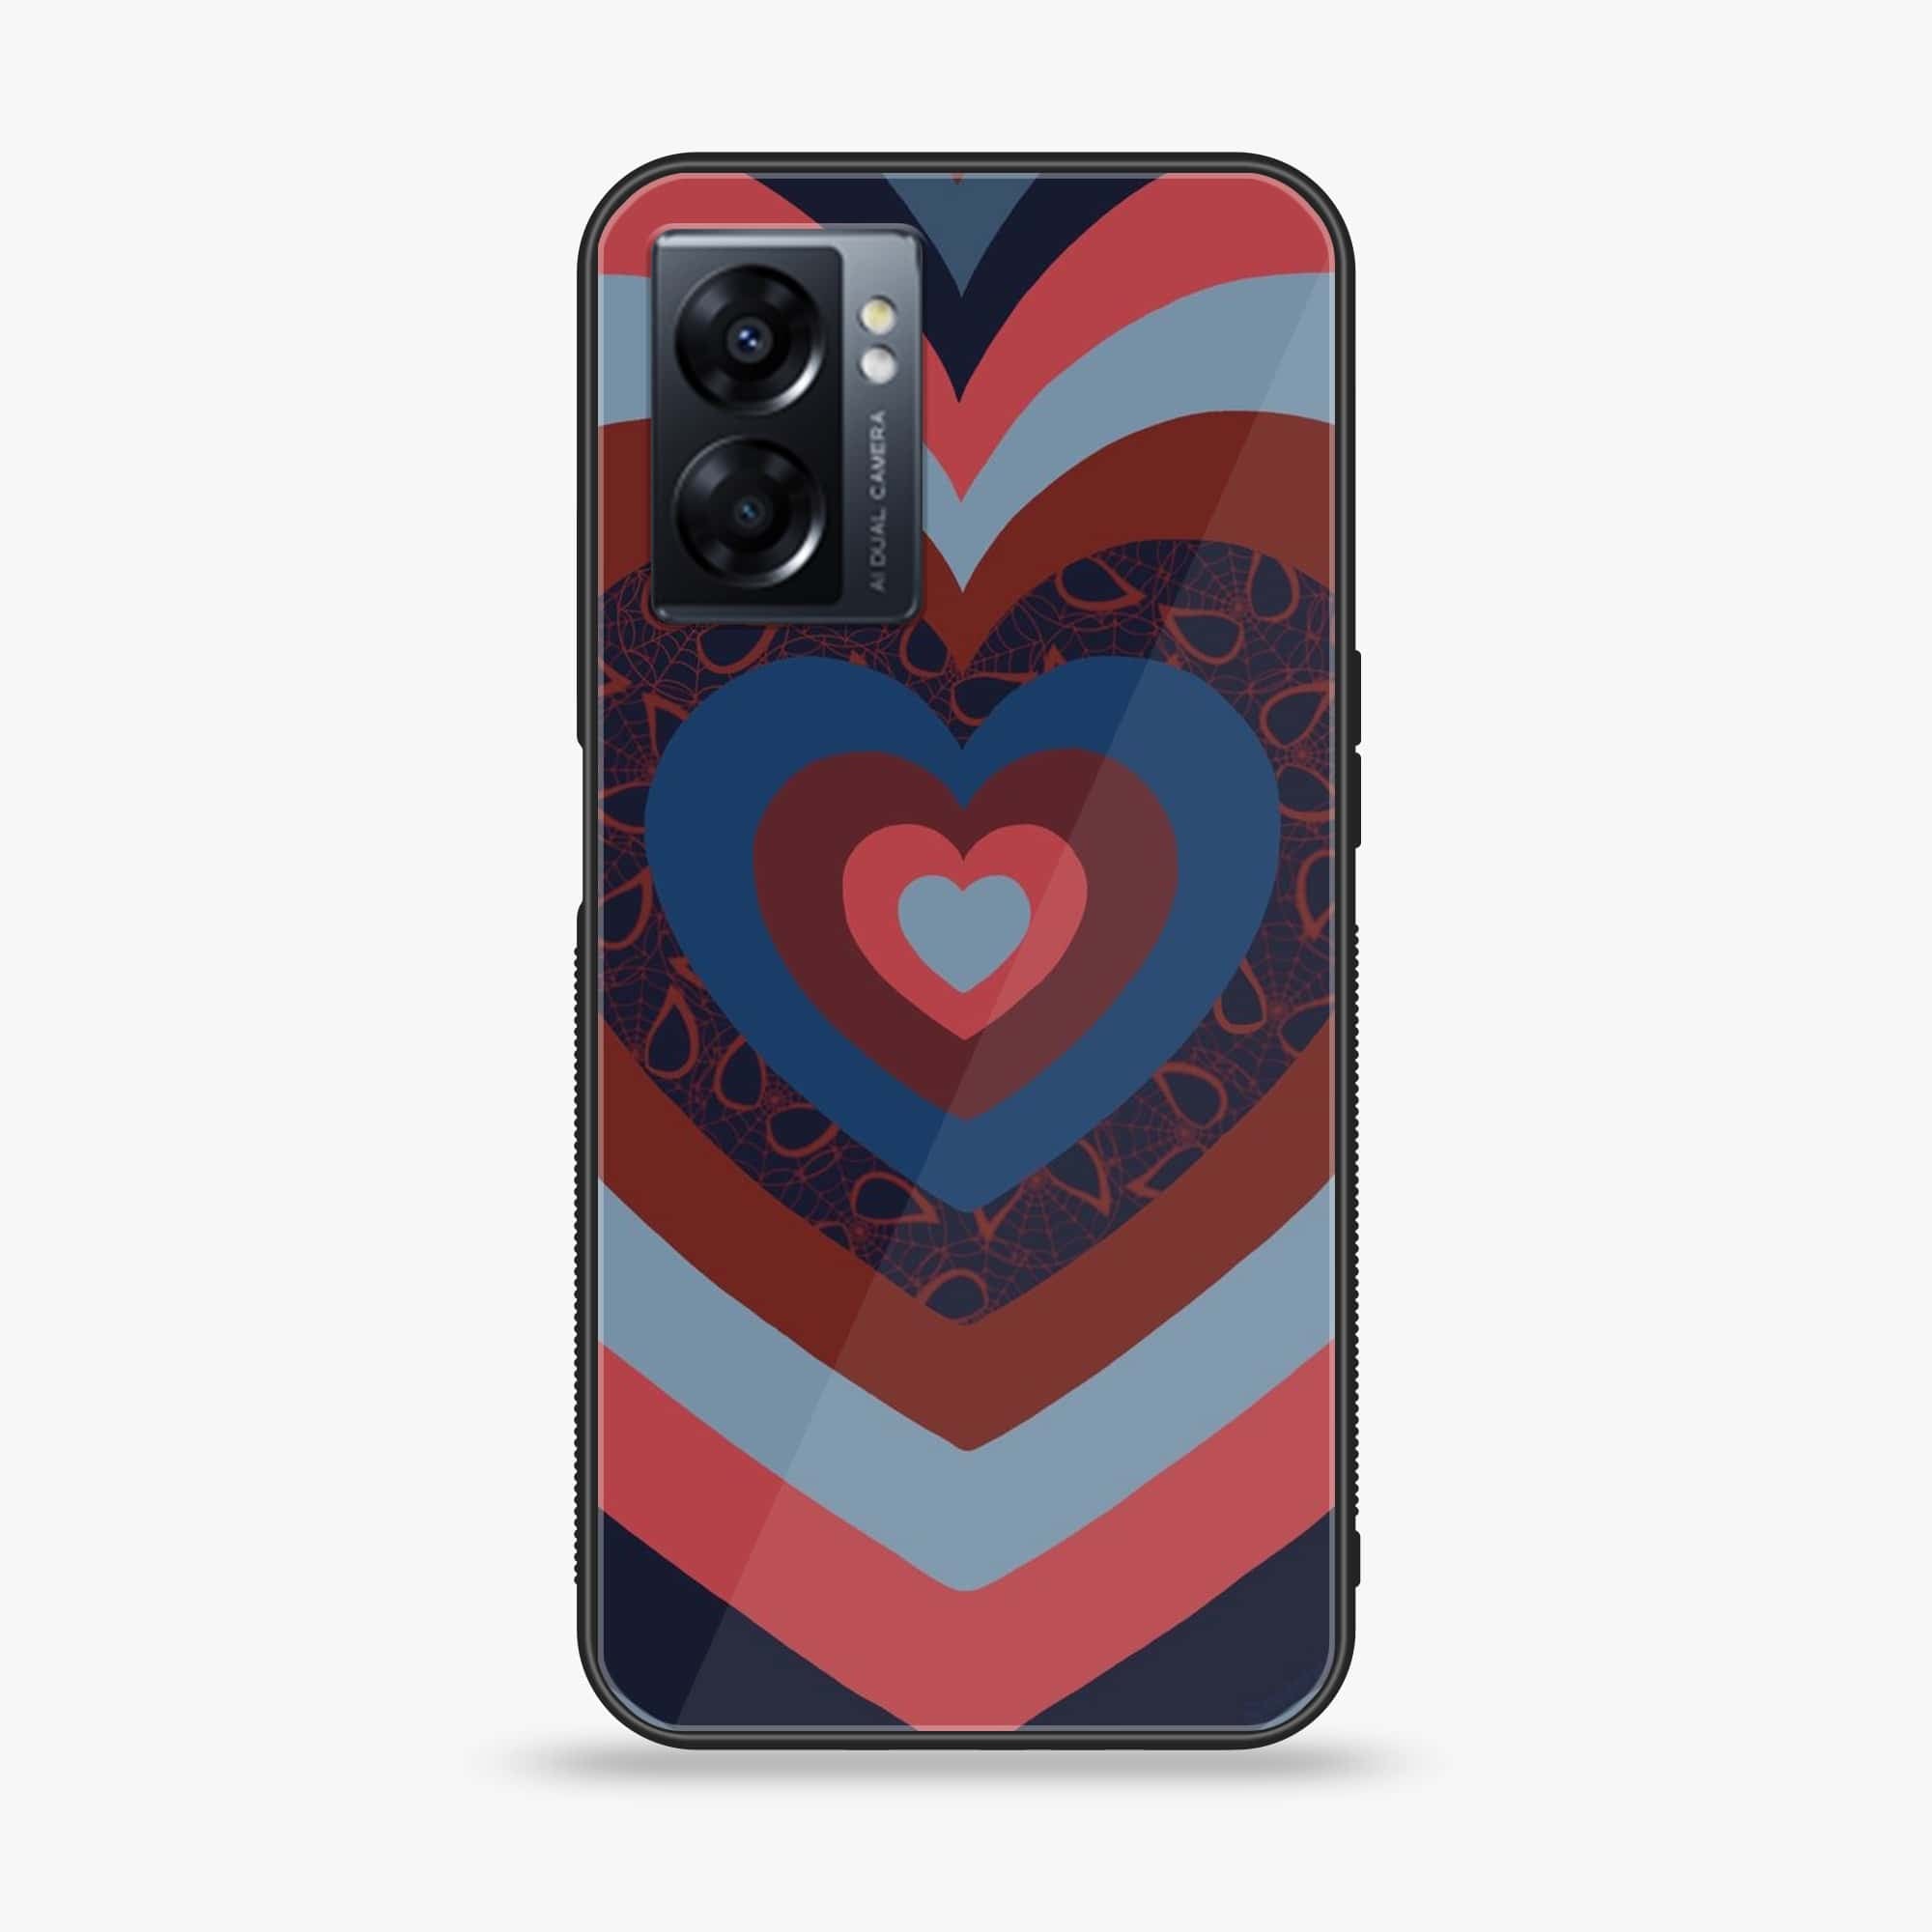 Oppo A77s - Heart Beat Series 2.0 - Premium Printed Glass soft Bumper shock Proof Case